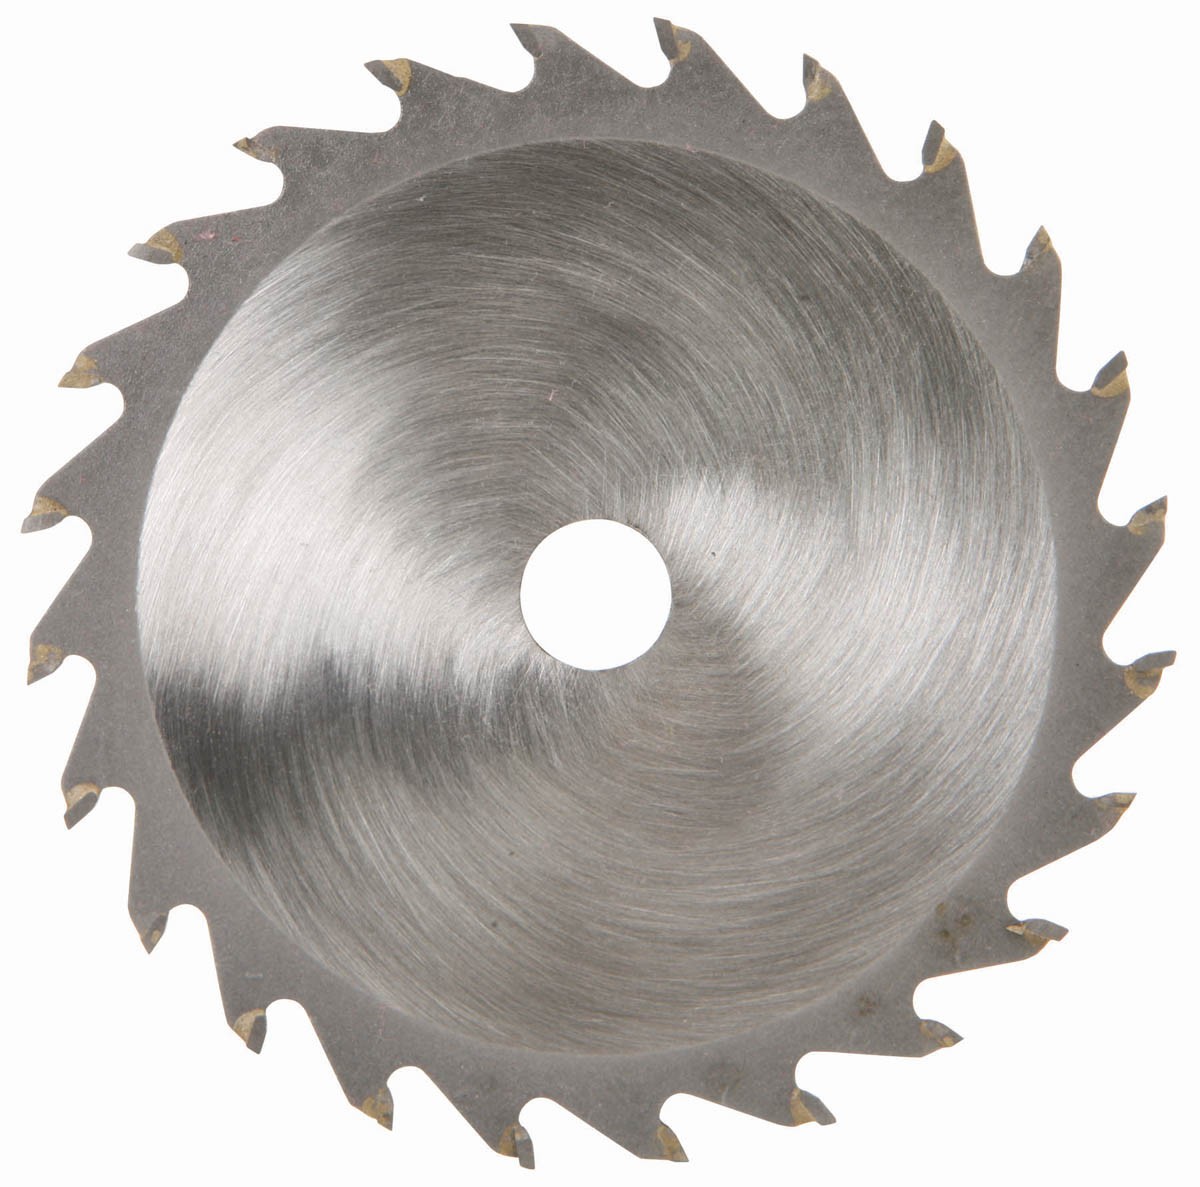 Hand Saw With Saw Blade Clipart 